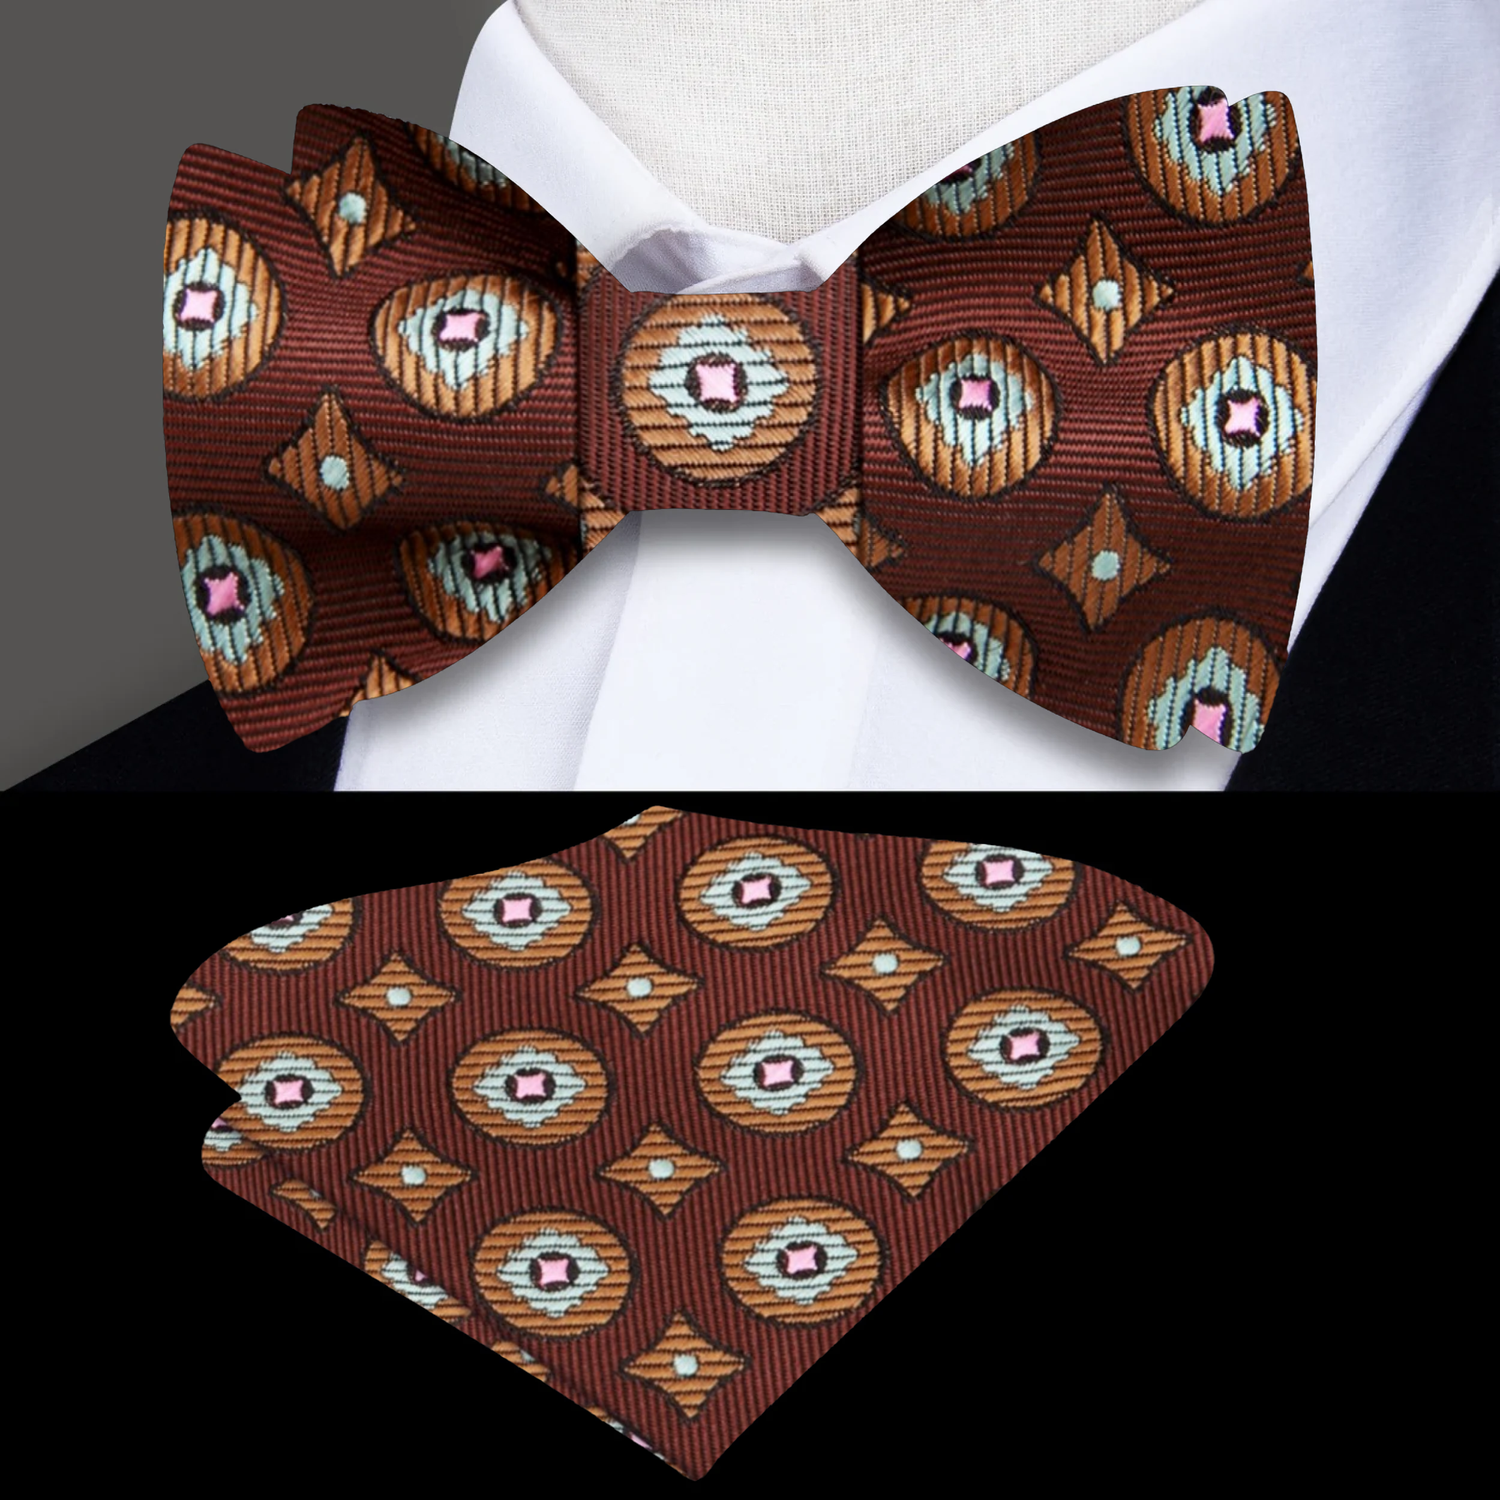 A Brown, Pink Geometric Circles and Diamonds Pattern Silk Self Tie Bow Tie, Matching Pocket Square